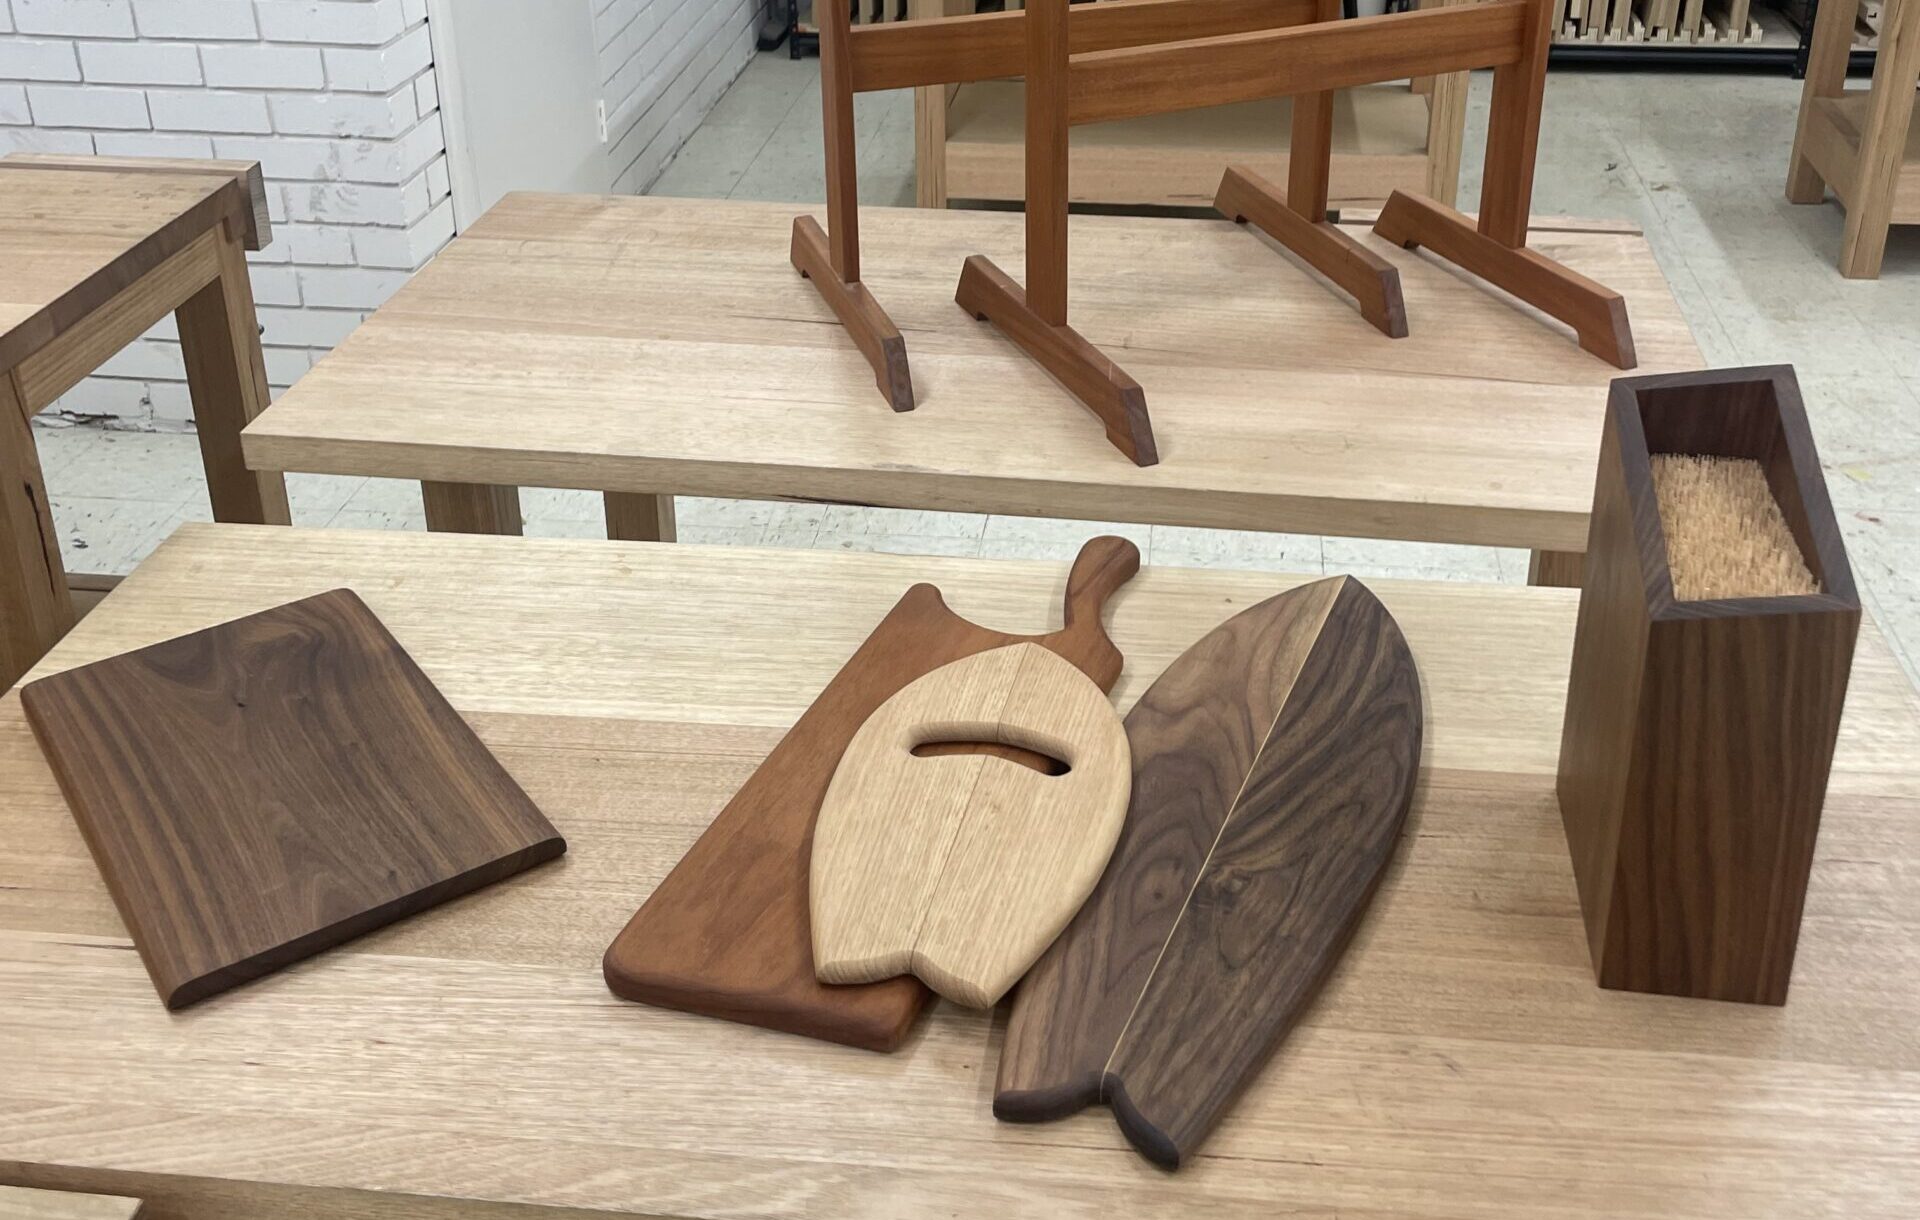 Intro to Woodworking with Machines